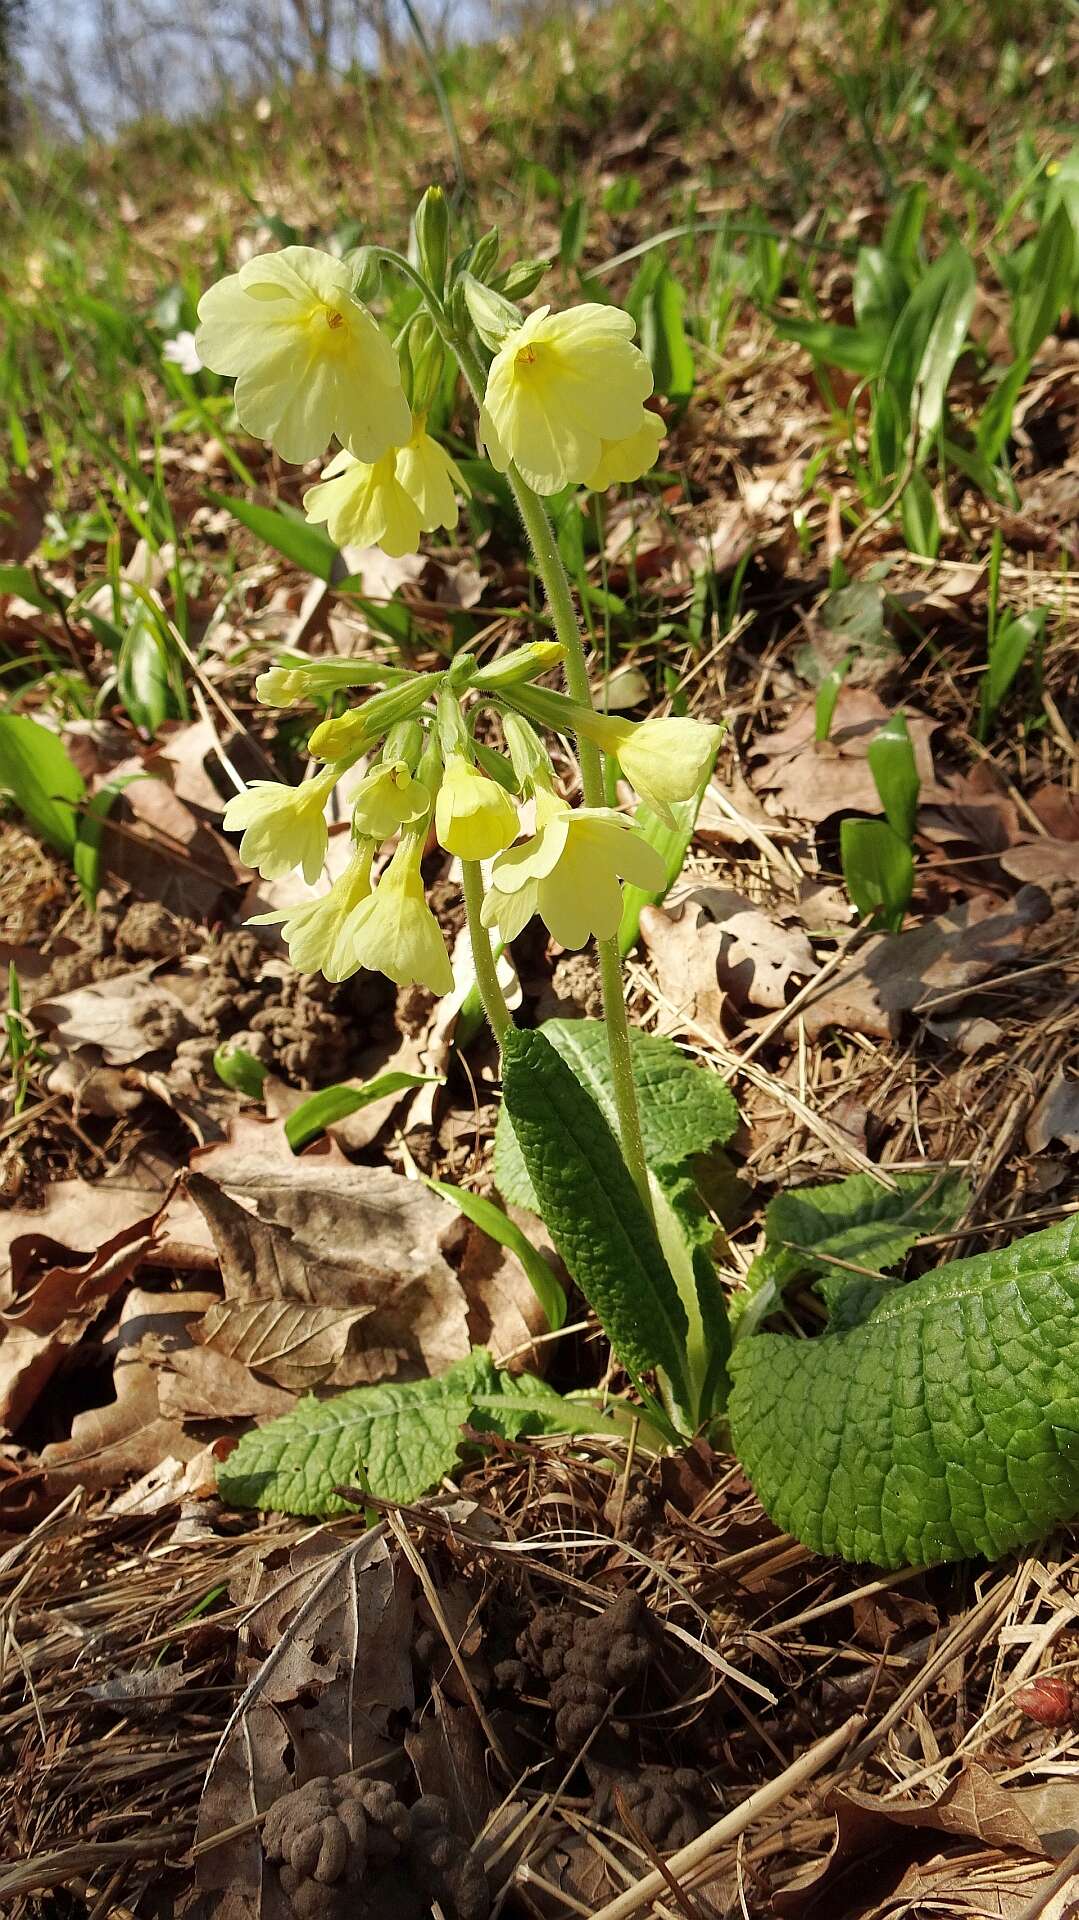 Image of oxlip